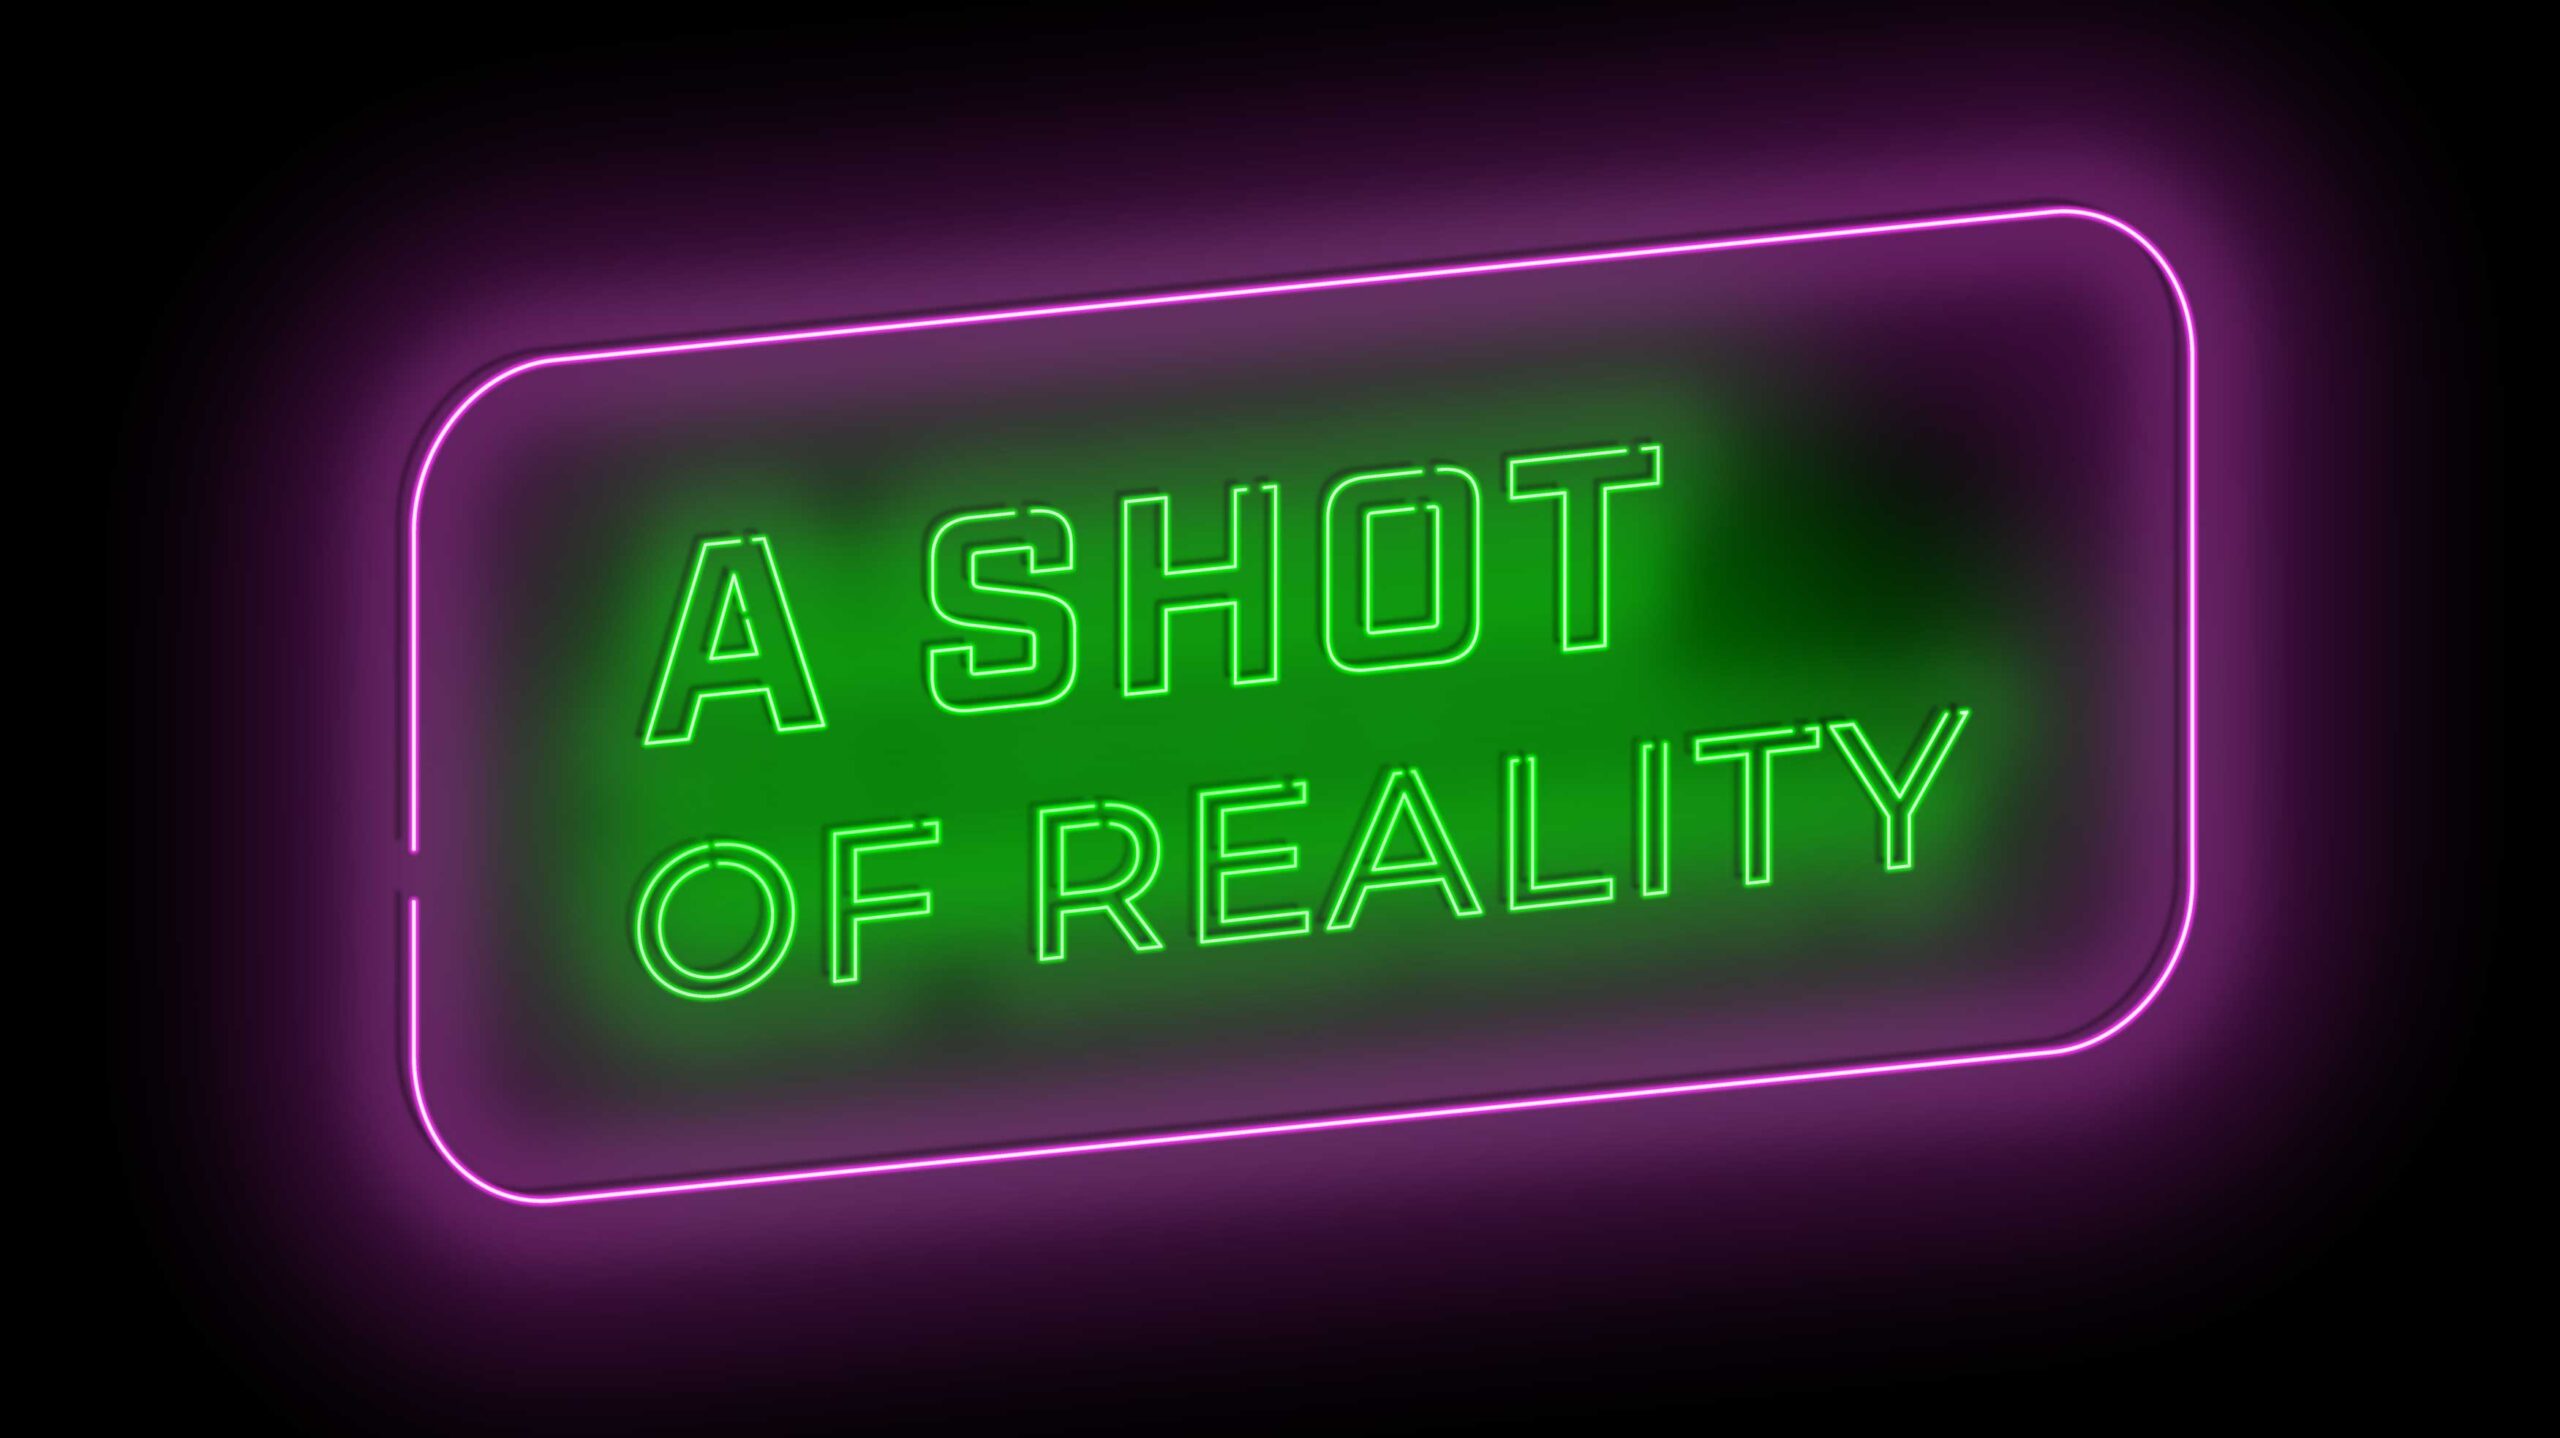 A shot of reality logo, with purple and green neon lights.